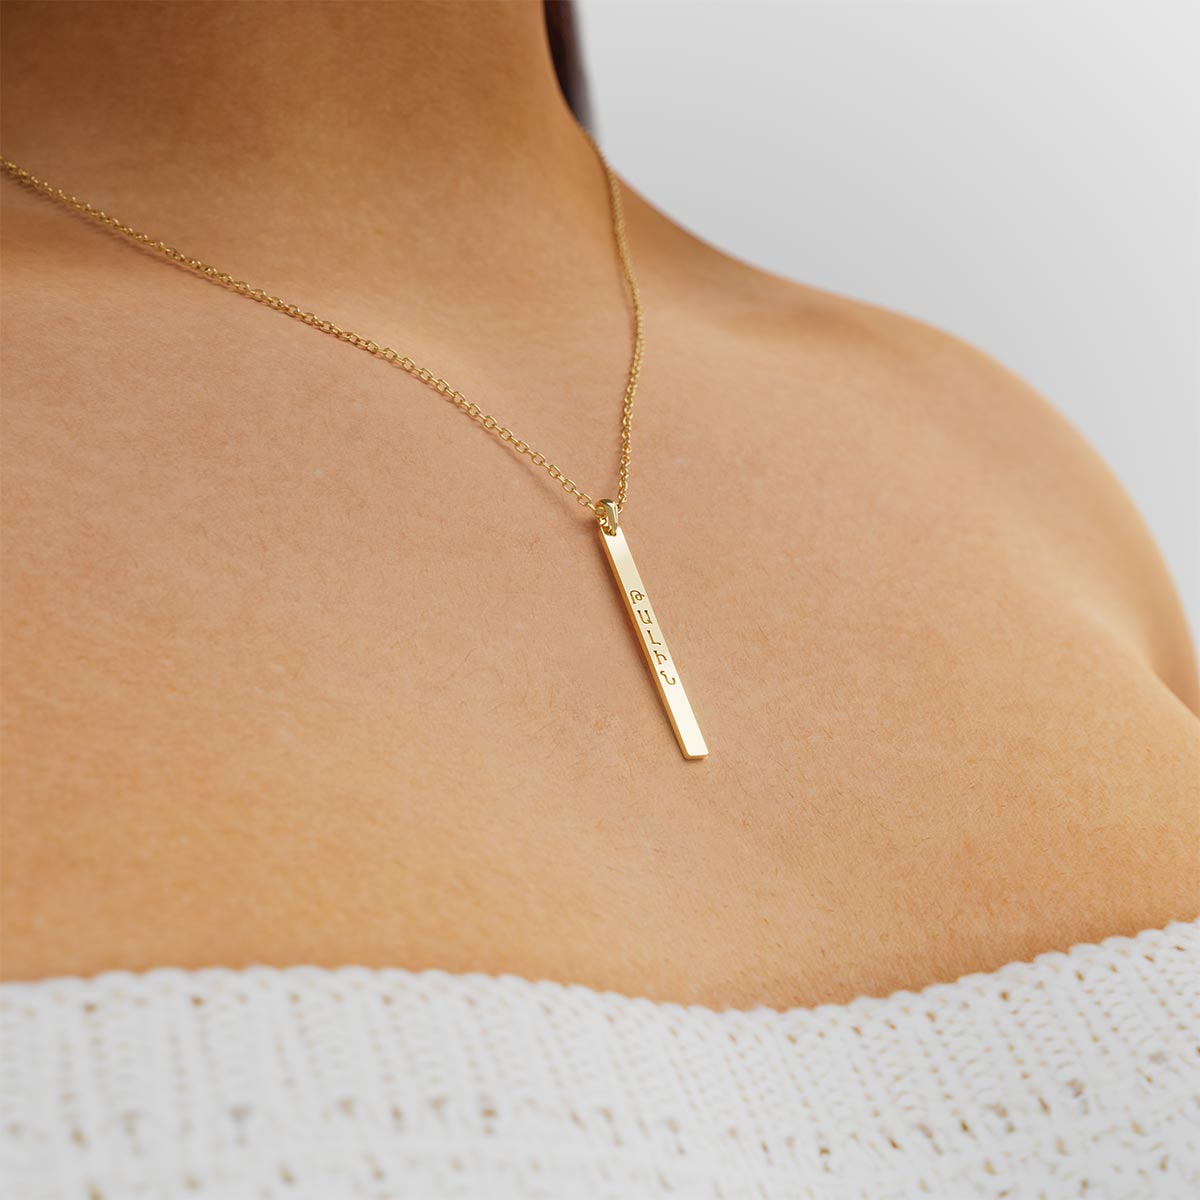 Vertical Bar Necklace with Armenian Engraving